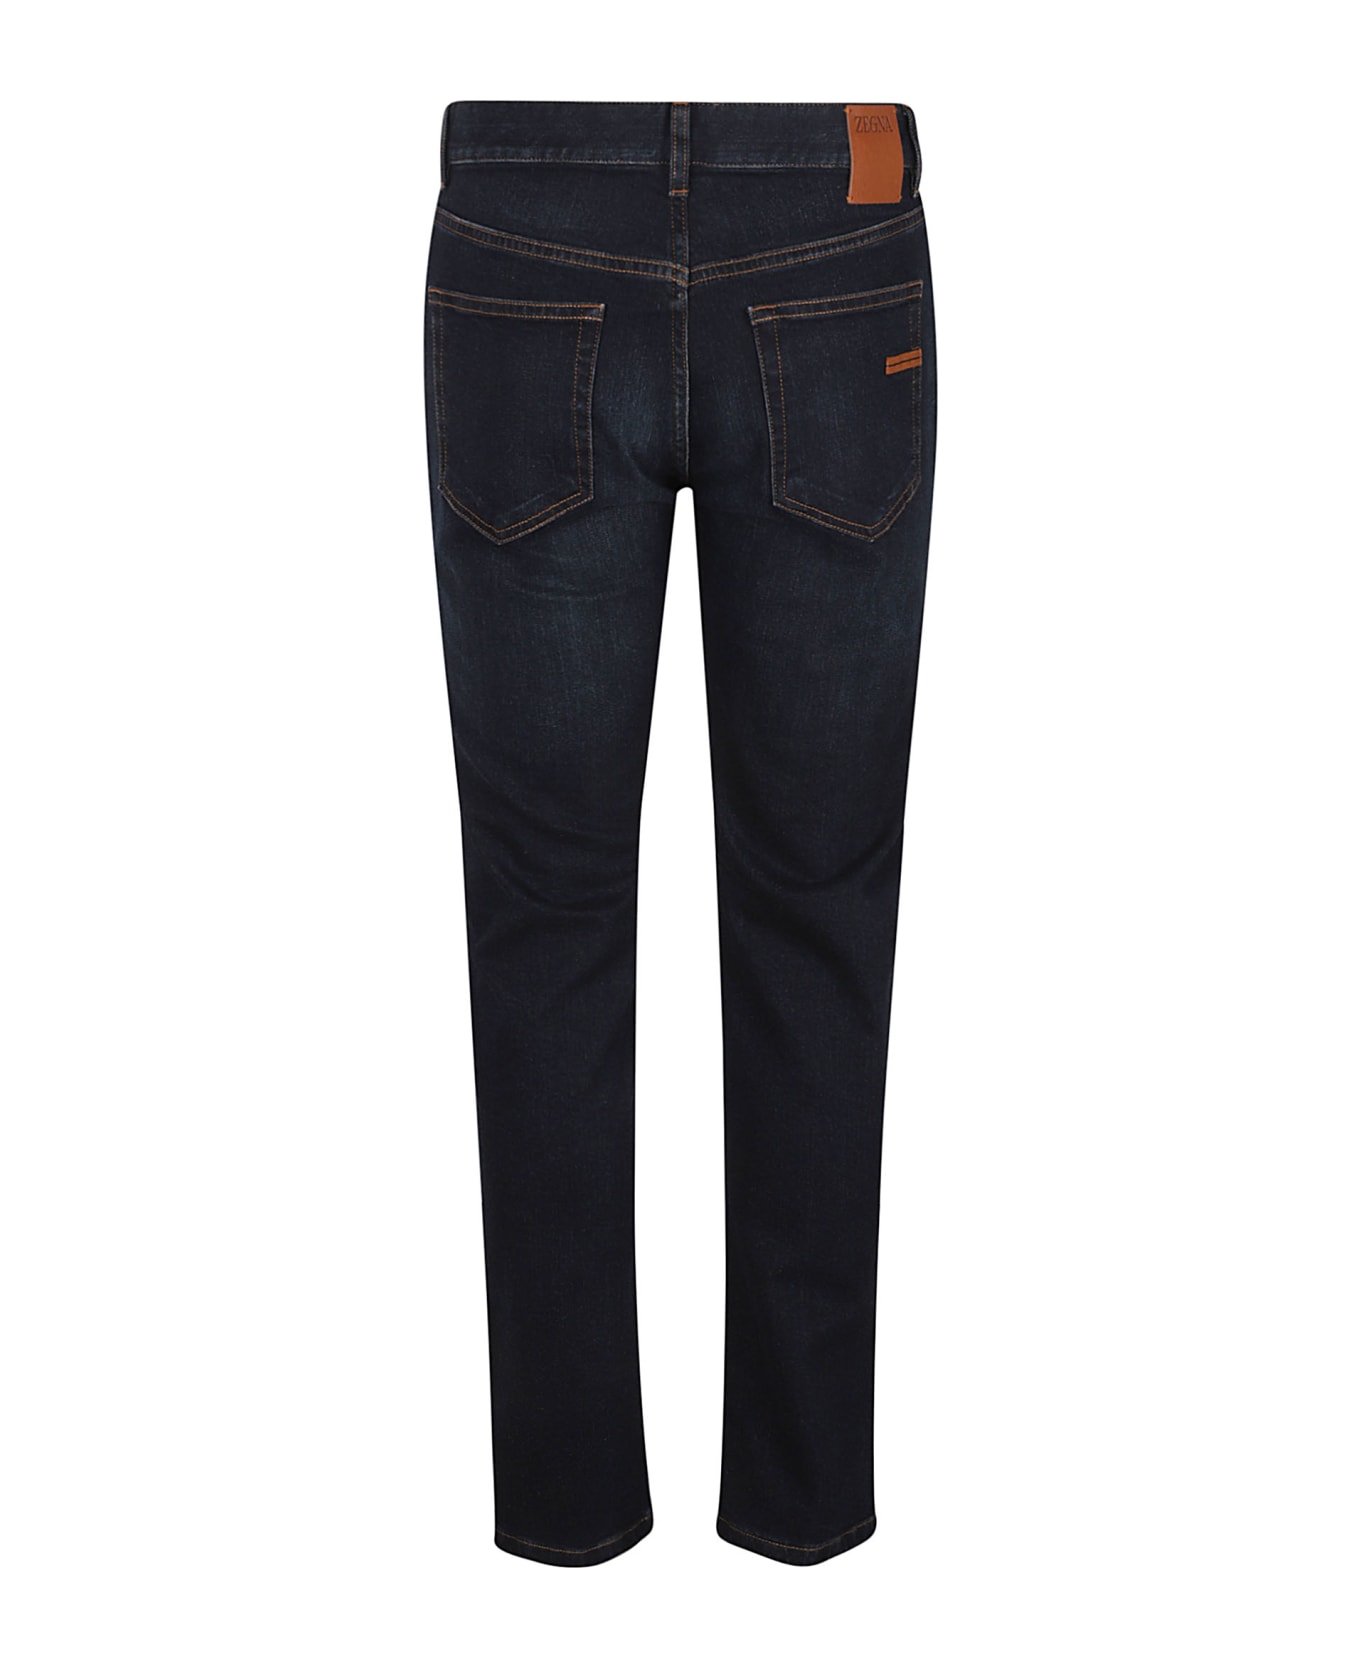 Zegna City Button Fitted Jeans - Denim